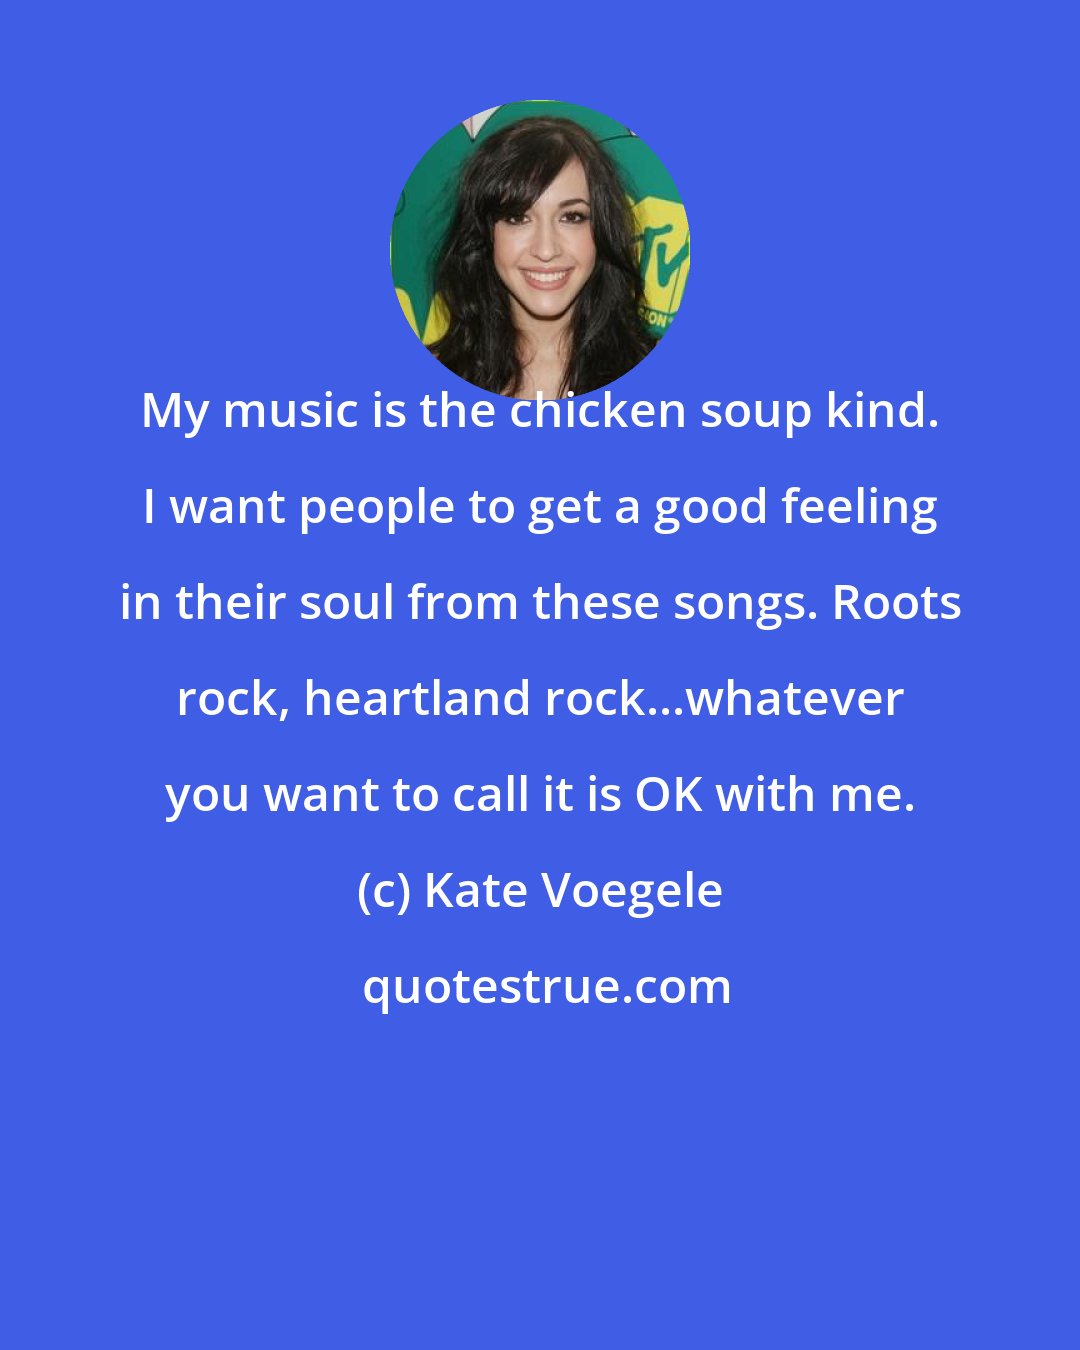 Kate Voegele: My music is the chicken soup kind. I want people to get a good feeling in their soul from these songs. Roots rock, heartland rock...whatever you want to call it is OK with me.